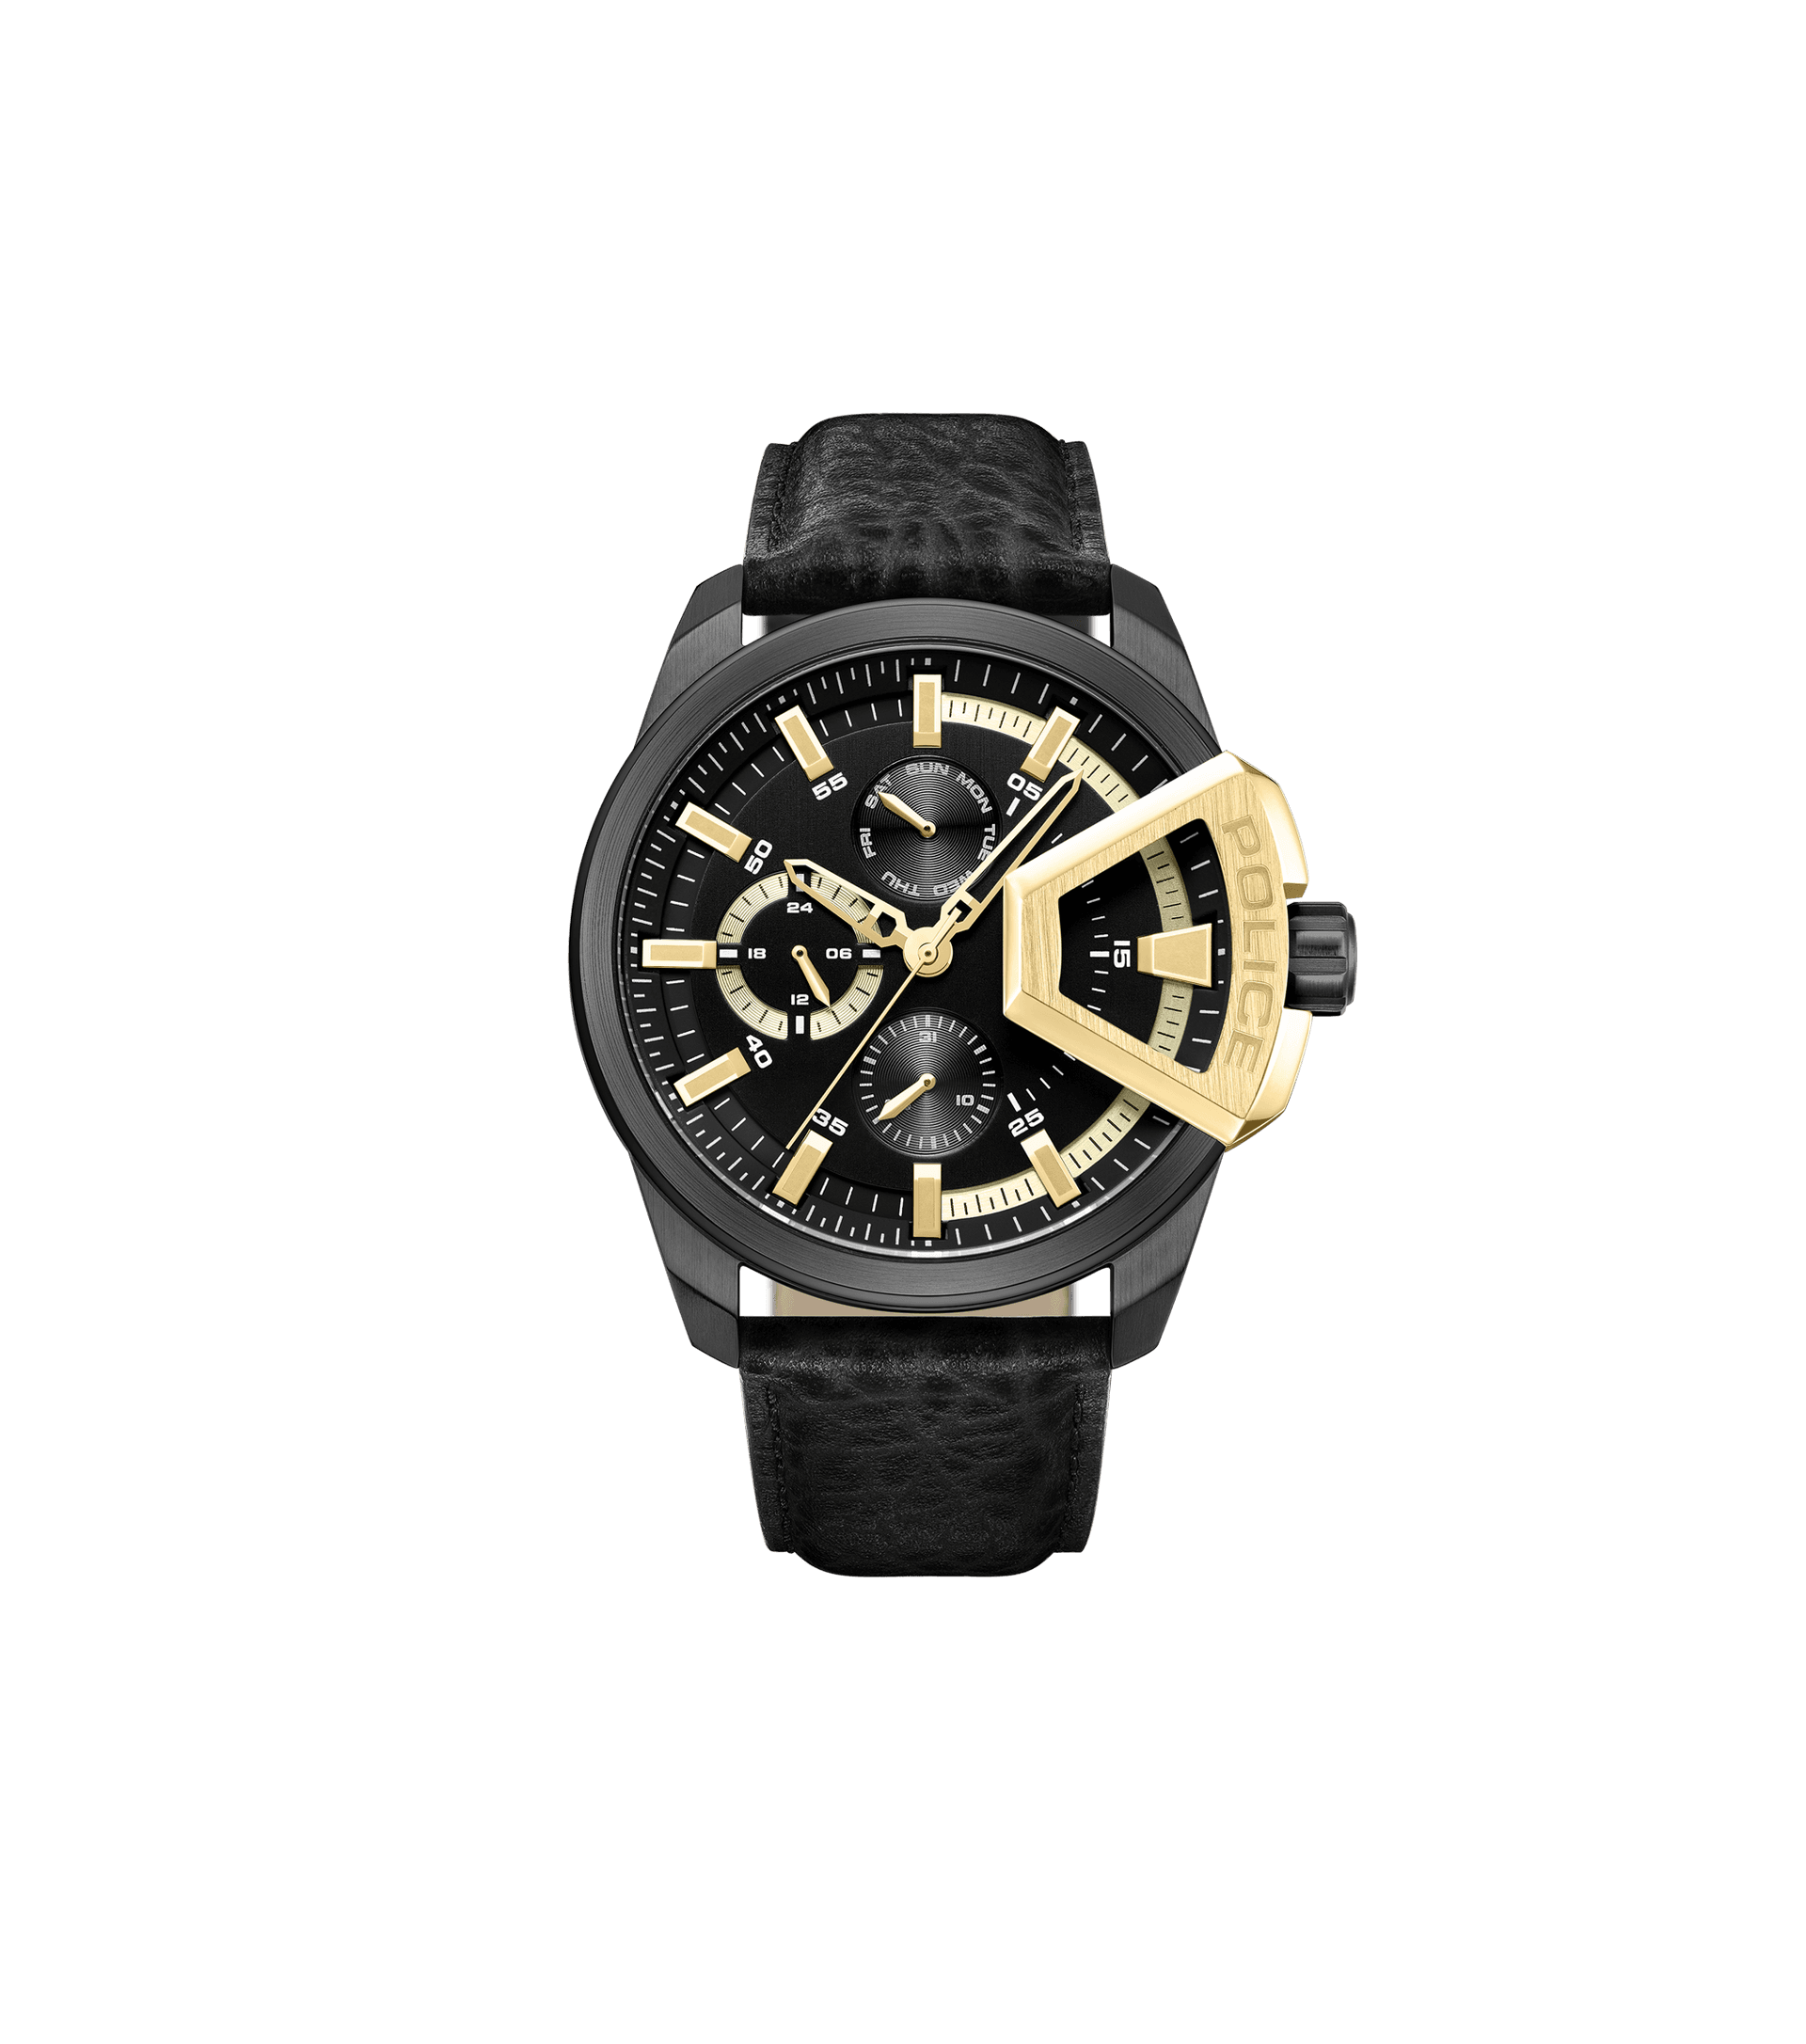 Police And Collection The By Black, watches Bracelet Black Set Police For Men Gift Gold, - Watch Anniversary